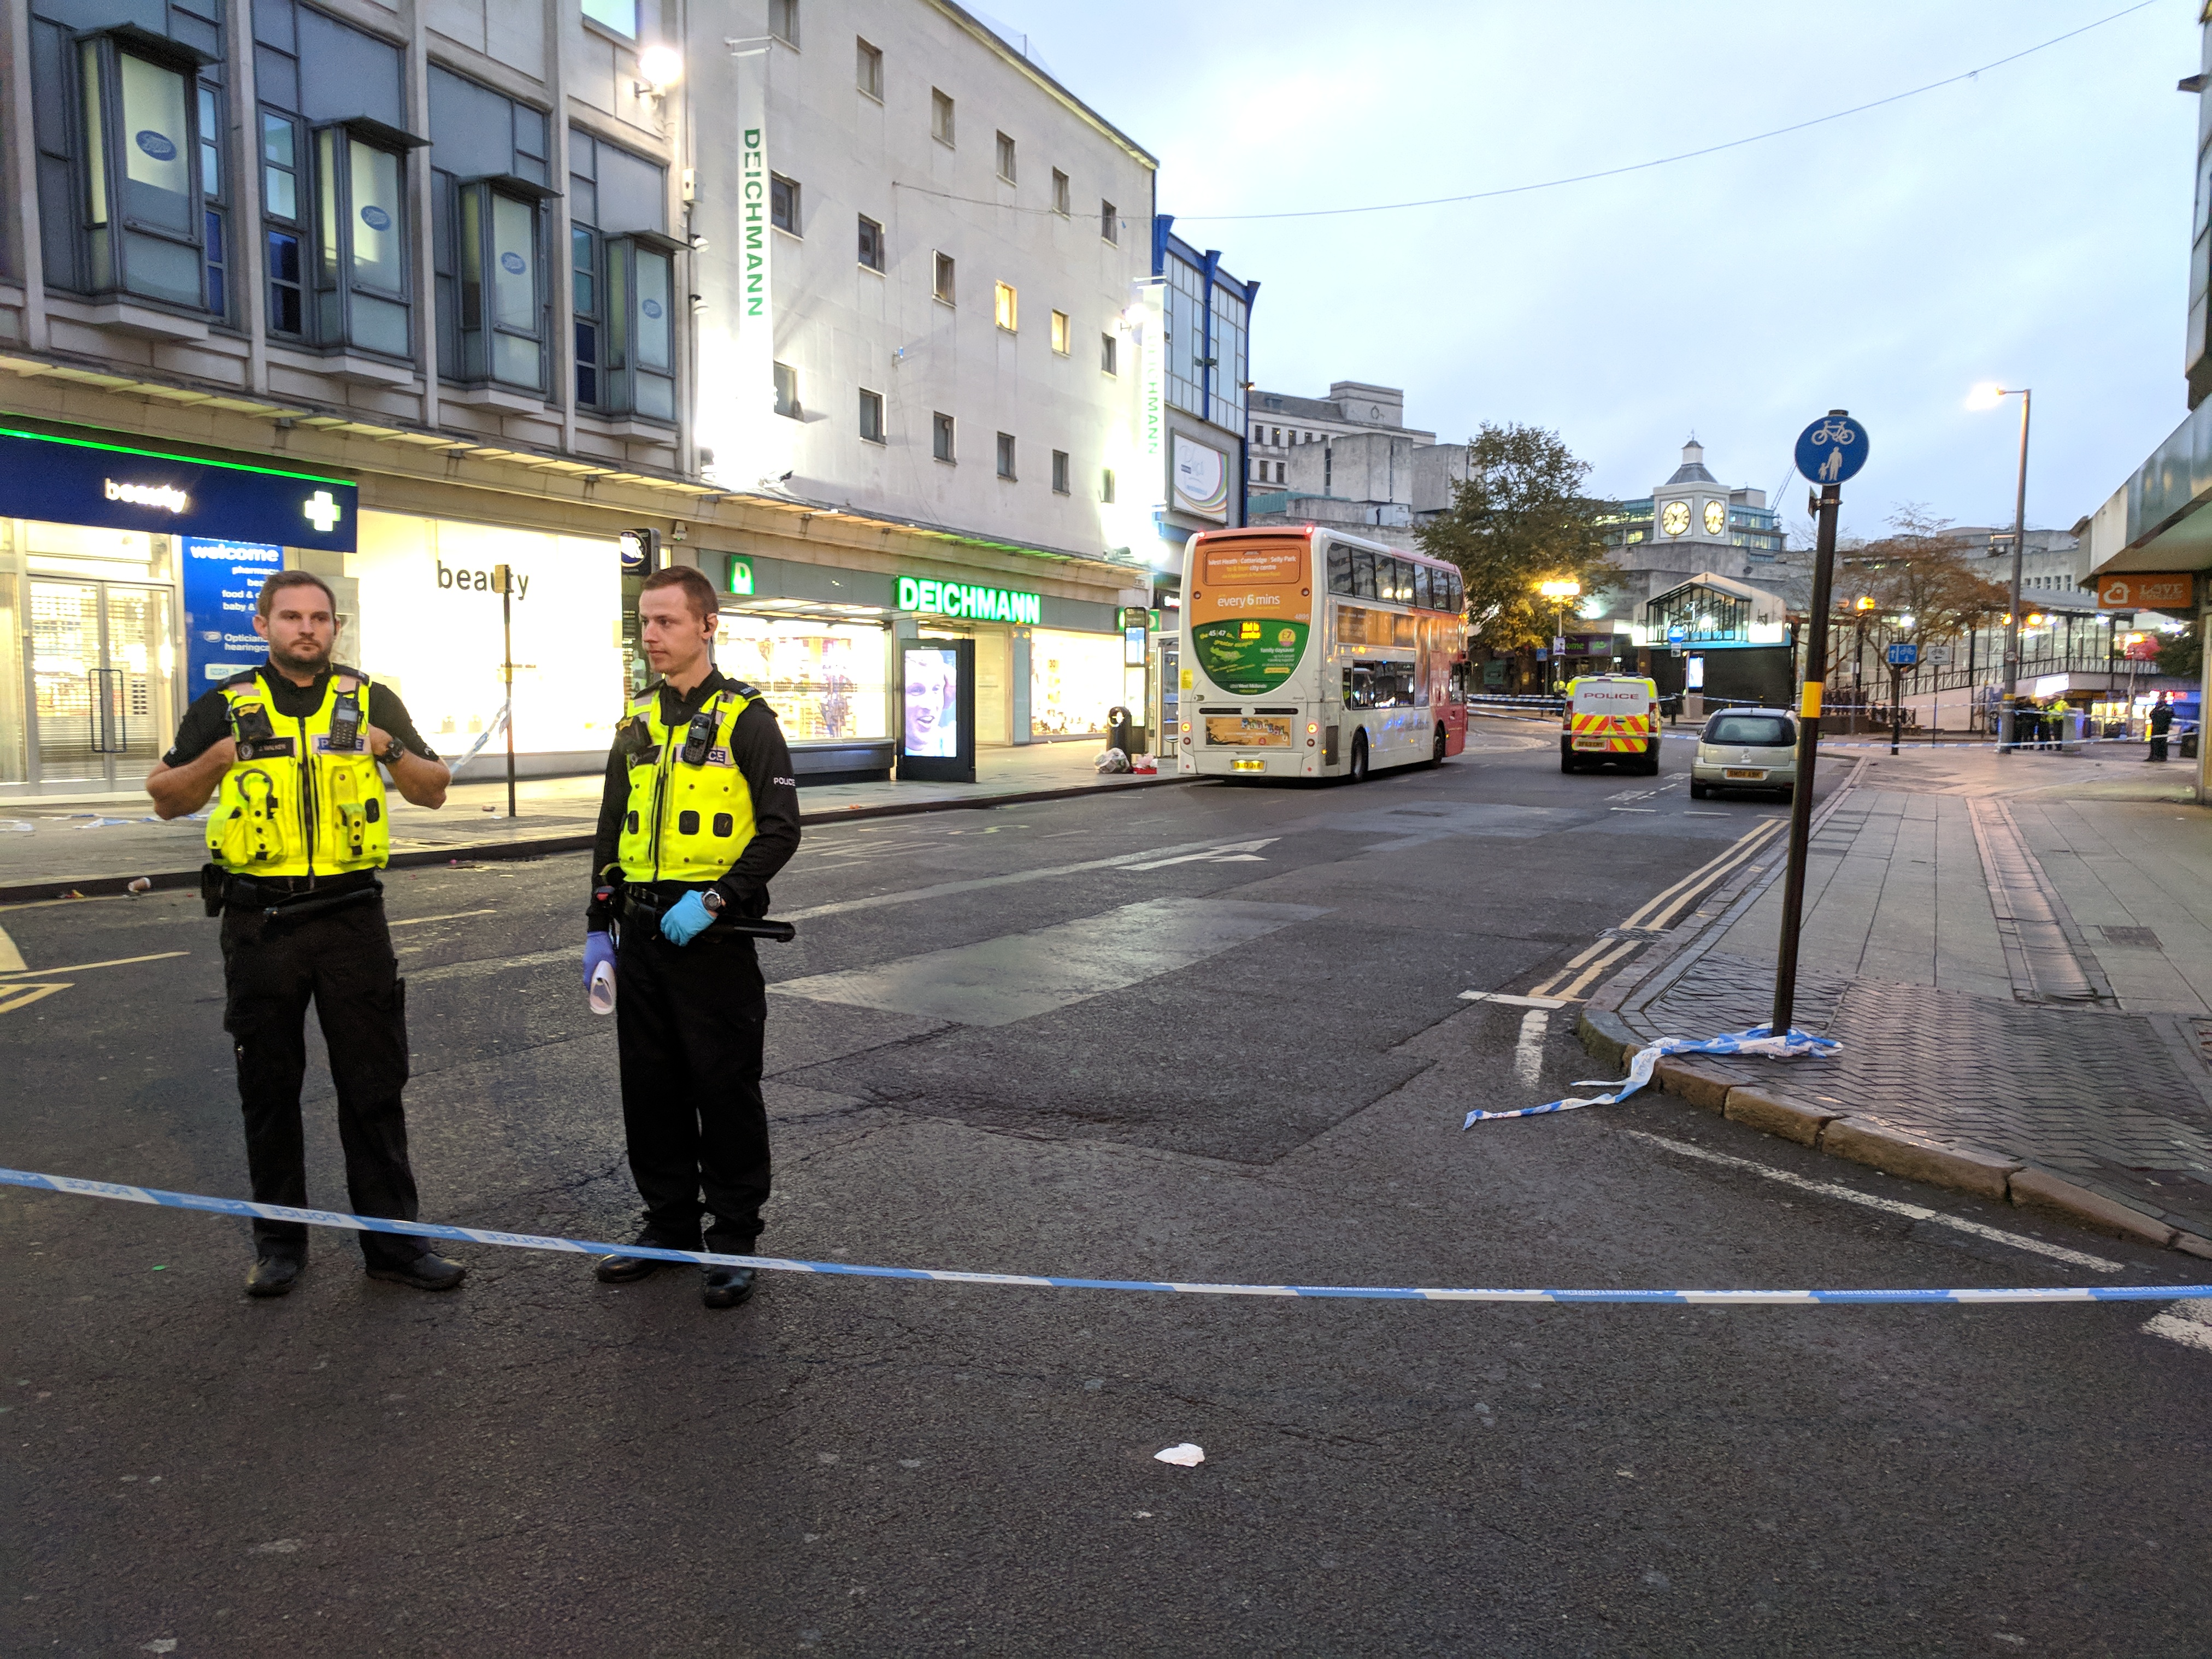 Area sealed off with police tape with two officers standing guard